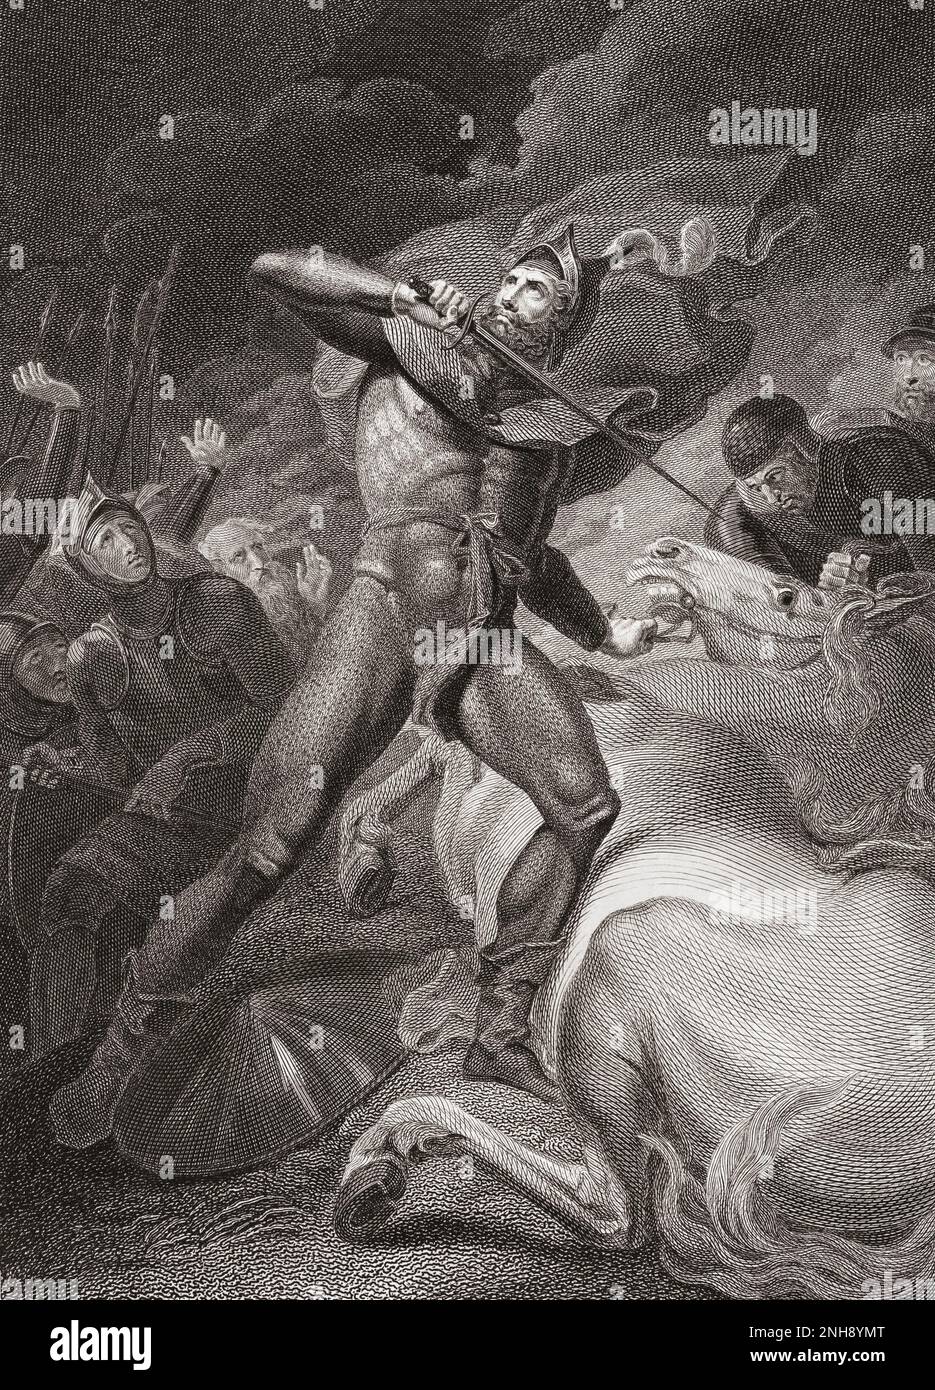 The resolute conduct of the Earl of Warwick previous to the battle of Touton.  The Earl kills his horse to show he will stand with his soldiers.  Battle of Touton, March 29, 1461, during the War of the Roses. After a print by Thomas Holloway from the painting by Henry Tresham originally featured in Robert Bowyer's Historic Gallery, published between 1793 and 1806. Stock Photo